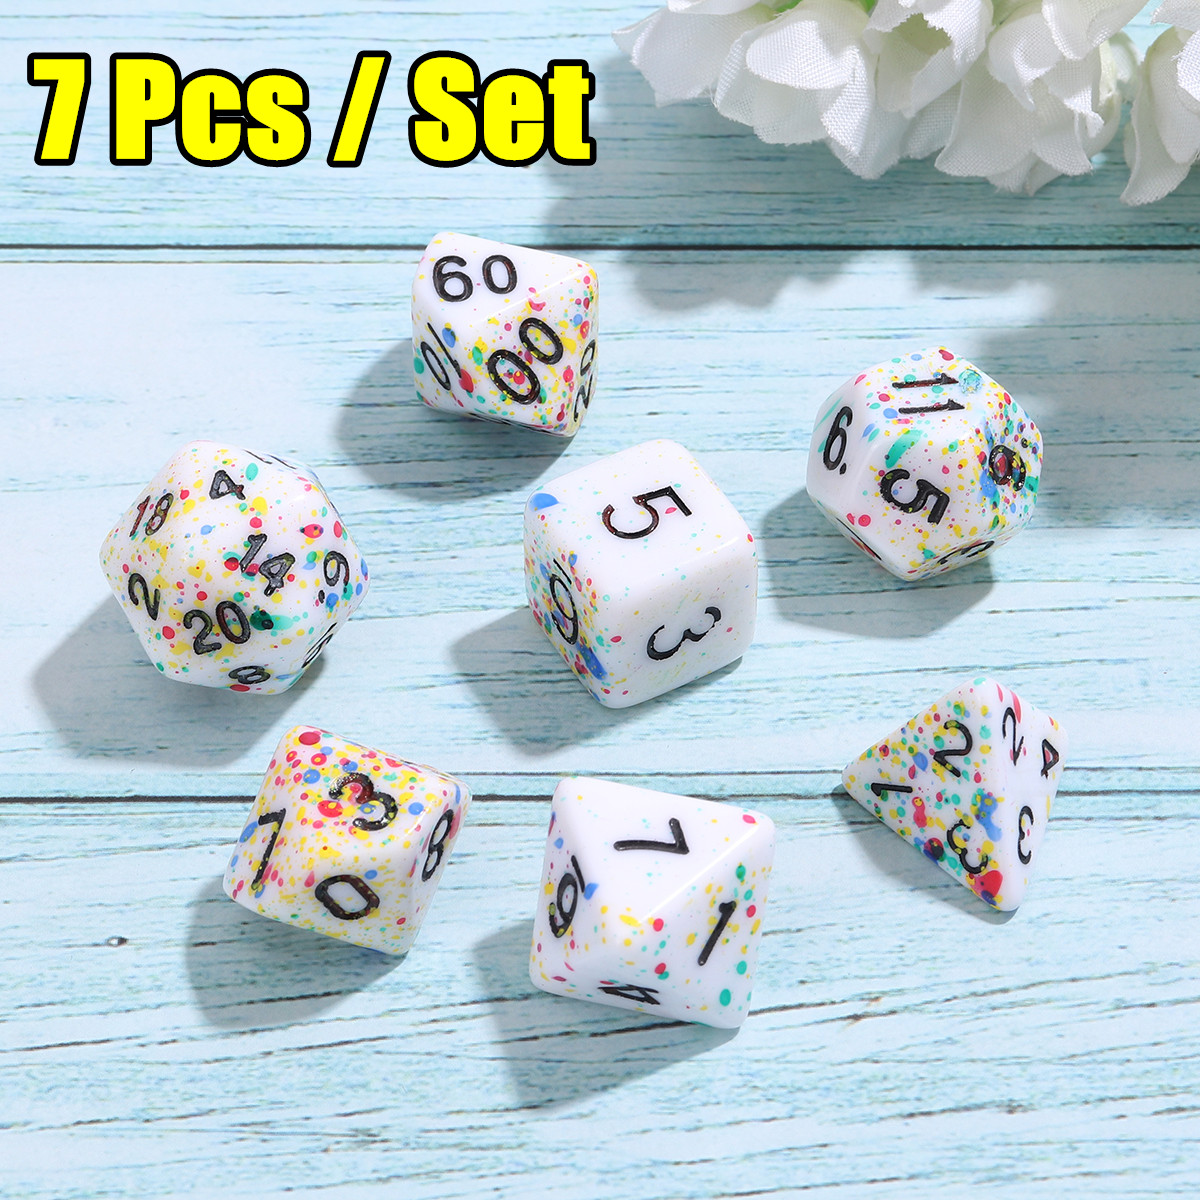 7Pcs-Acrylic-Polyhedral-Dice-Set-Colorful-Board-Game-Multisided-Dices-Gadget-1690588-1